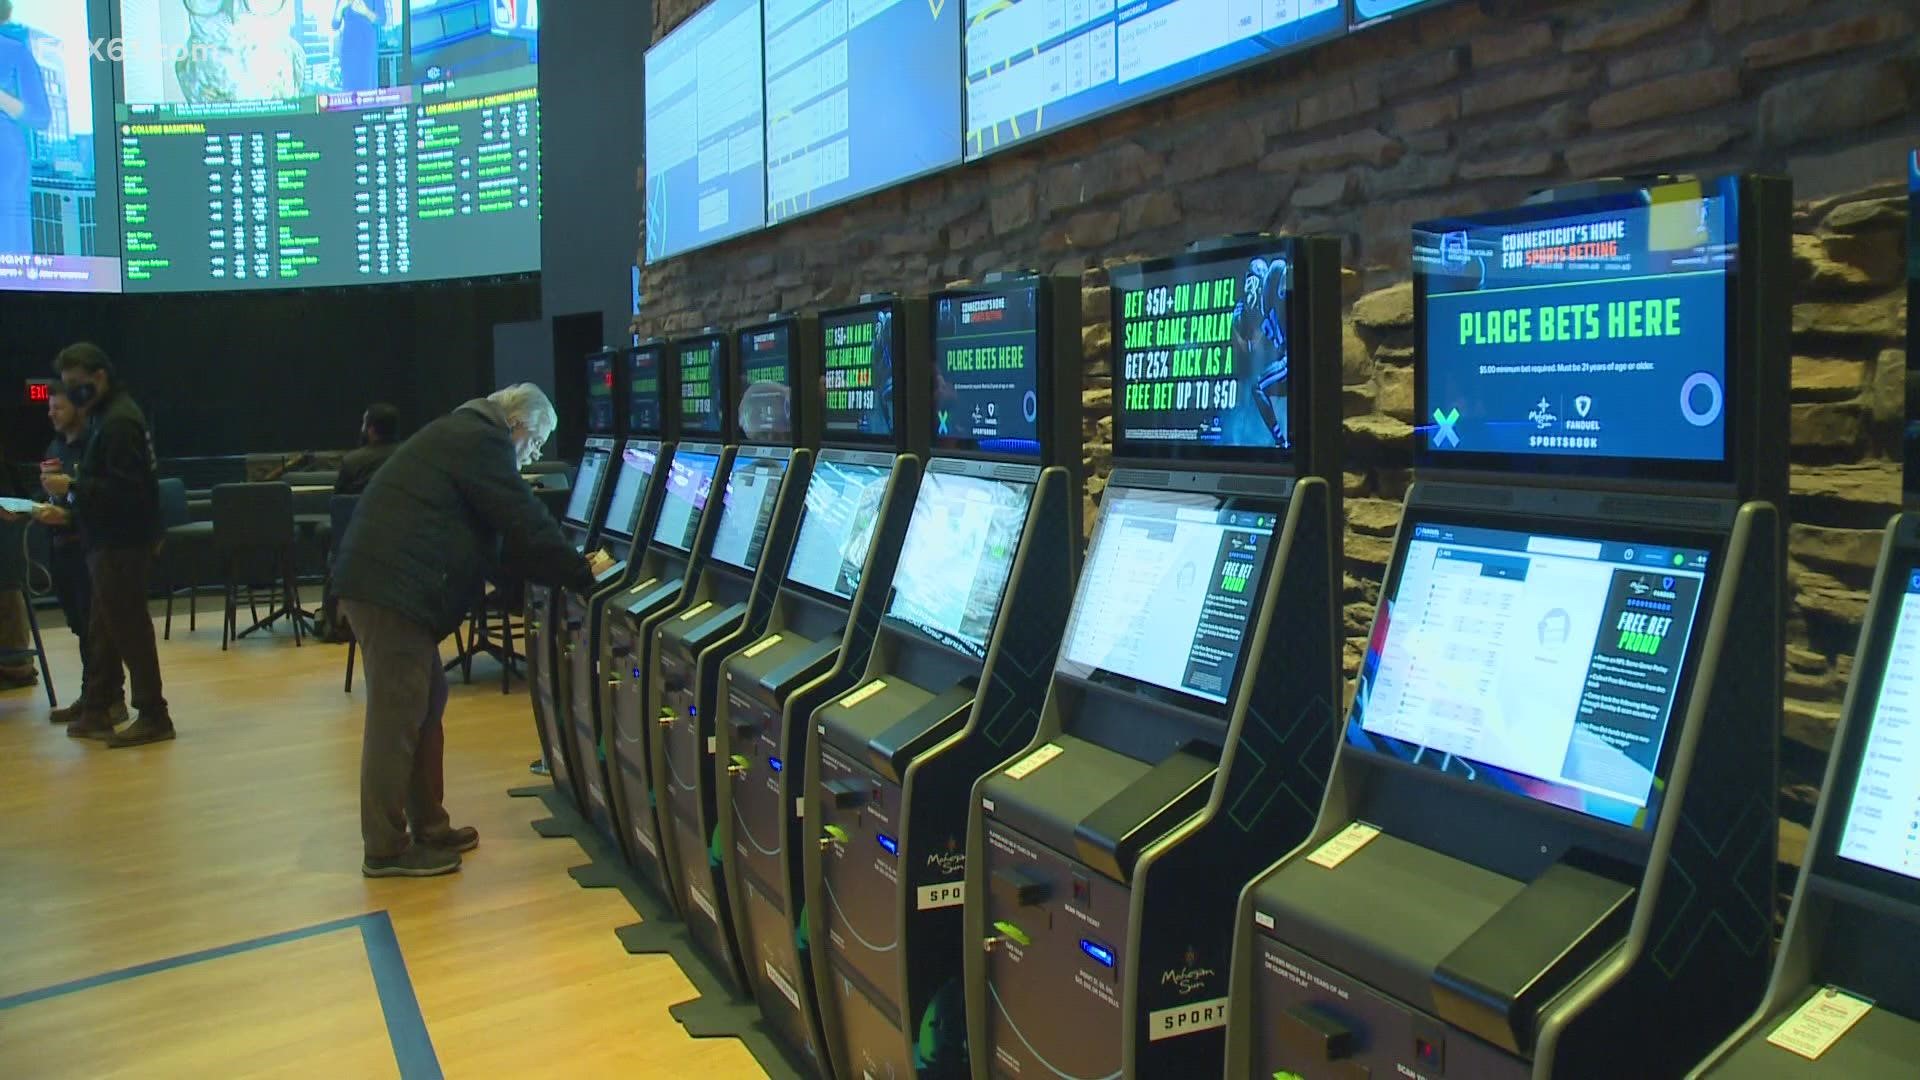 Advocates are encouraging those who will play, to do so responsibly. The CT Council on Problem Gambling has seen a significant increase in calls for help.